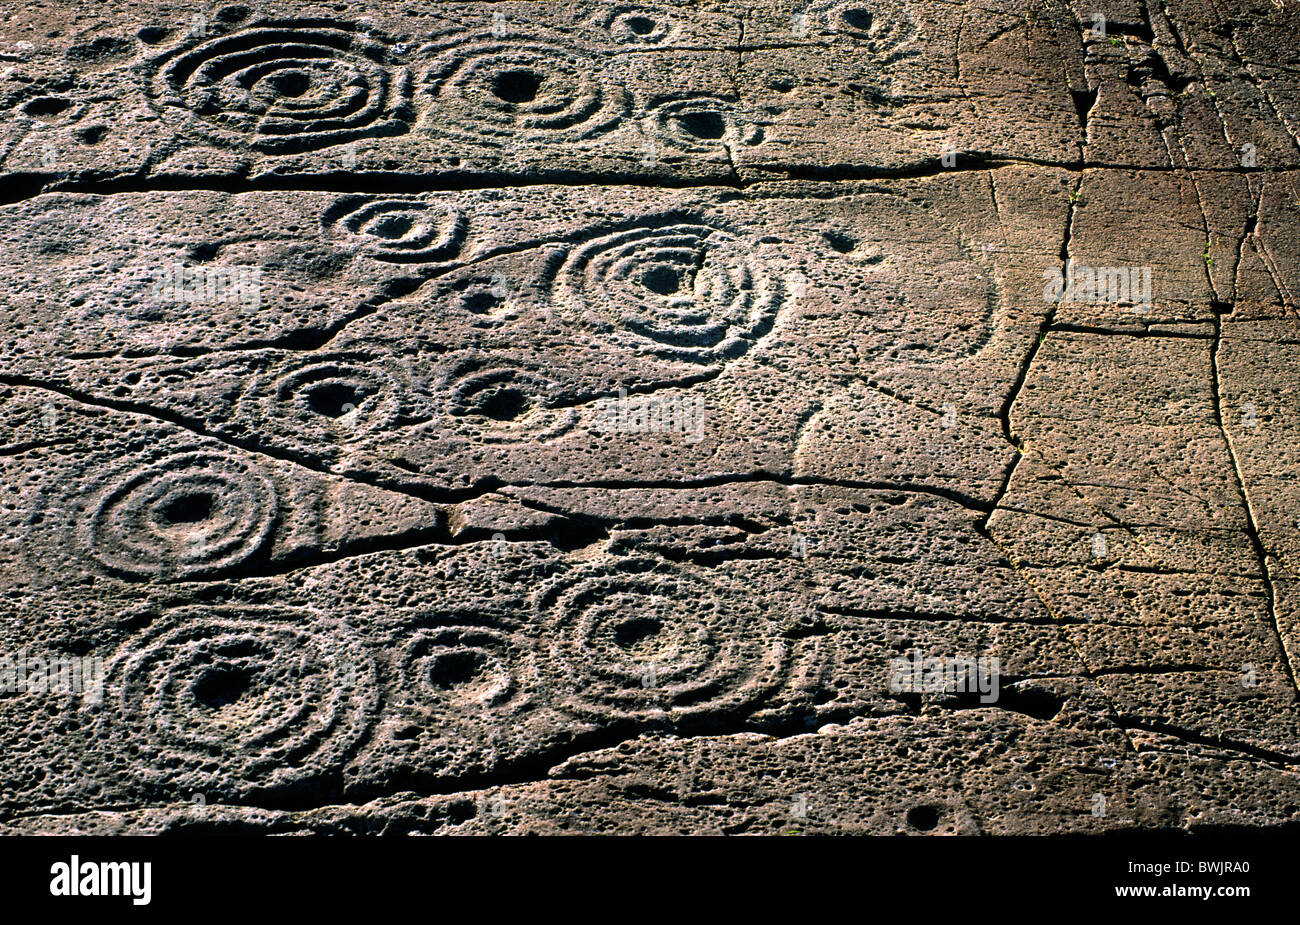 Prehistoric cup and ring mark carved stone rock art outcrop at Cairnbaan in the Kilmartin Valley, Argyll, west Scotland, UK Stock Photo